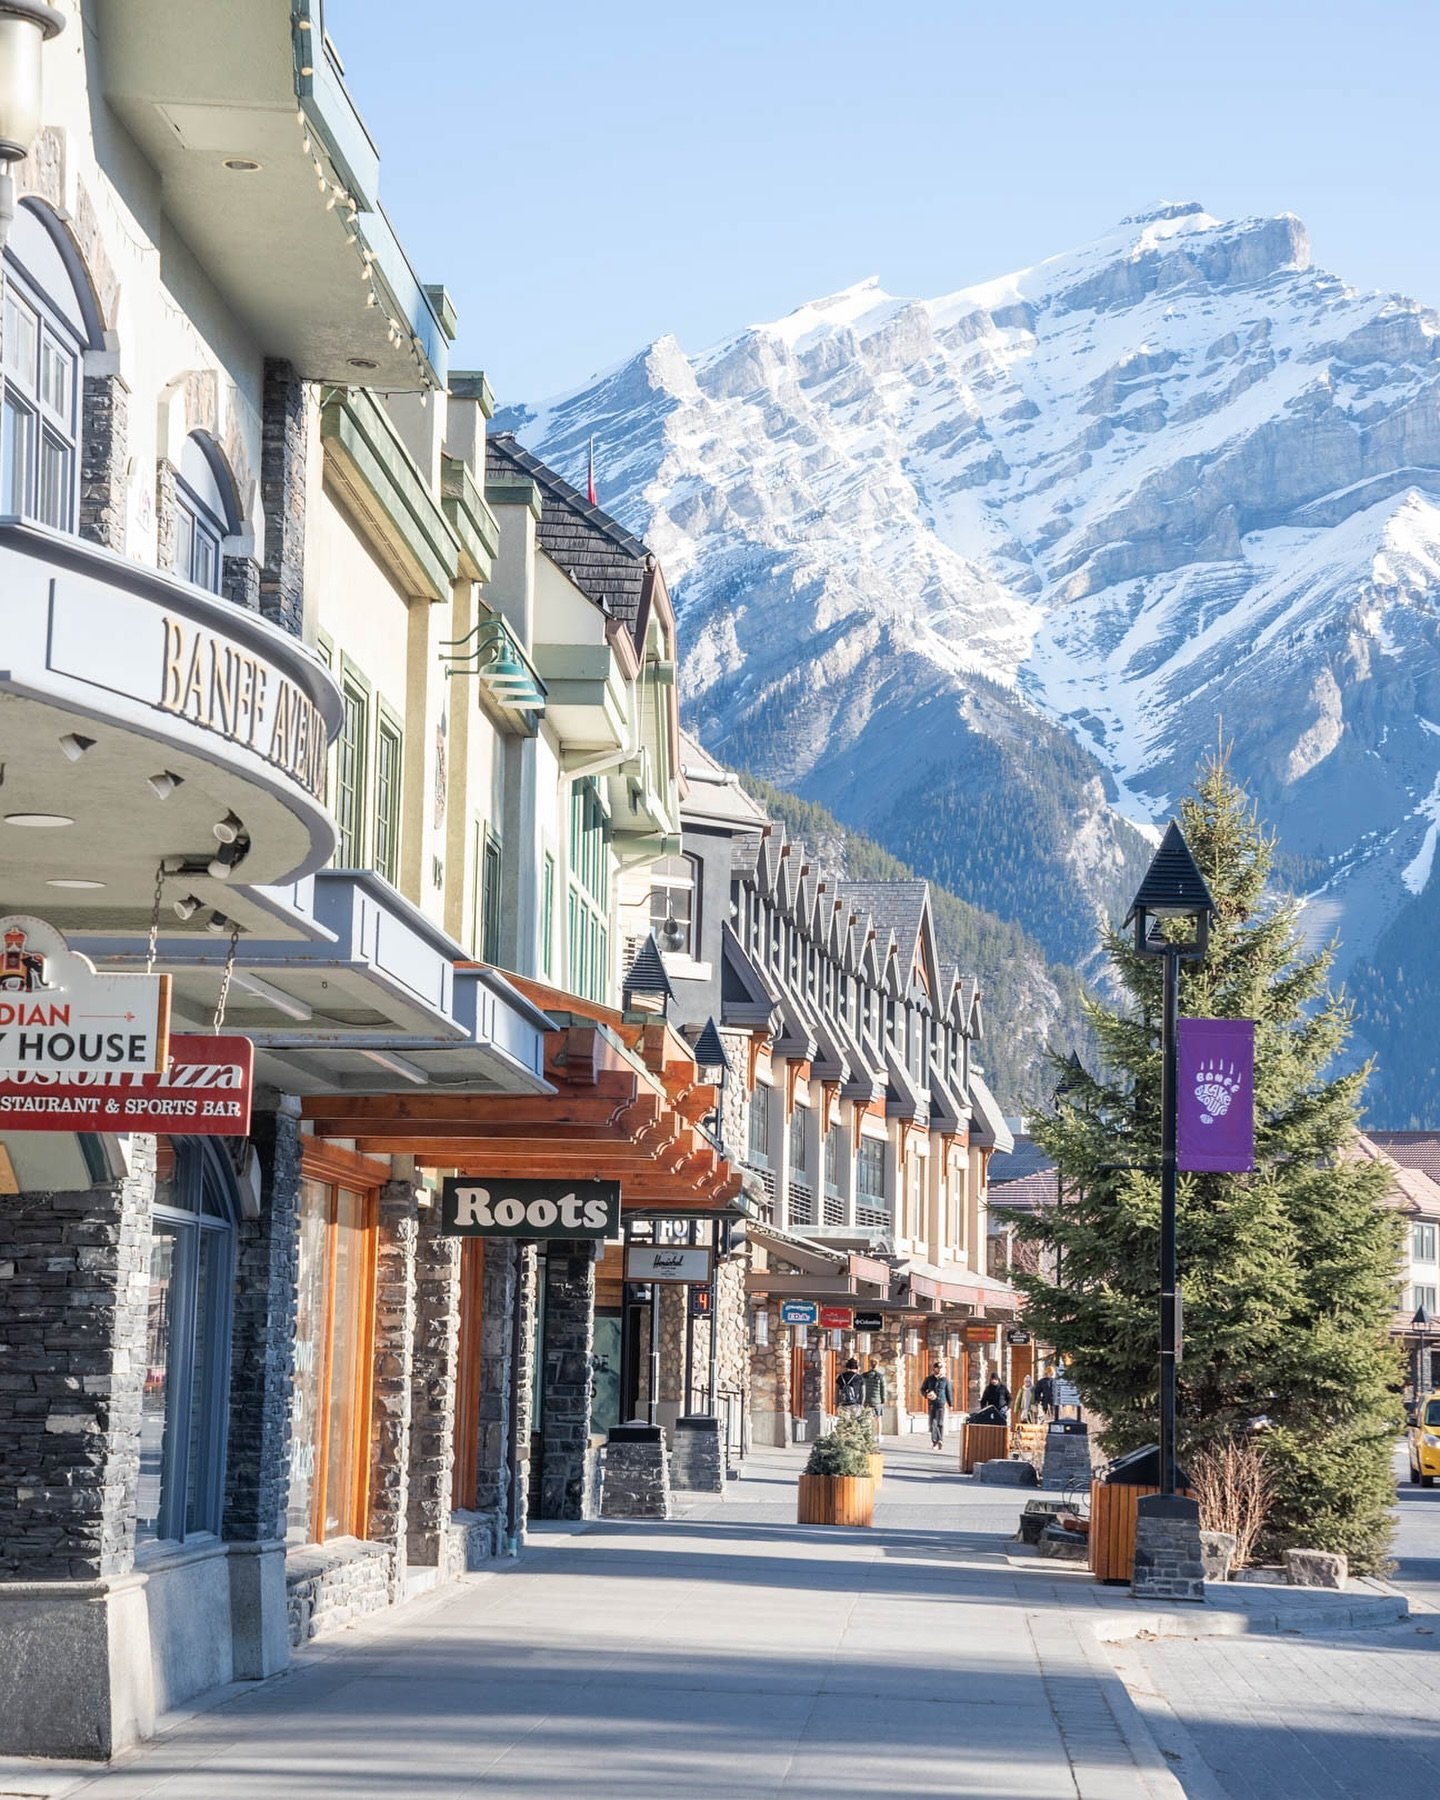 Located in the heart of the Canadian Rockies, Banff Avenue is a picturesque thoroughfare that stretches through the charming town of Banff, Alberta.
It is lined with quaint shops, restaurants, and surrounded by breathtaking scenery, with Cascade Moun